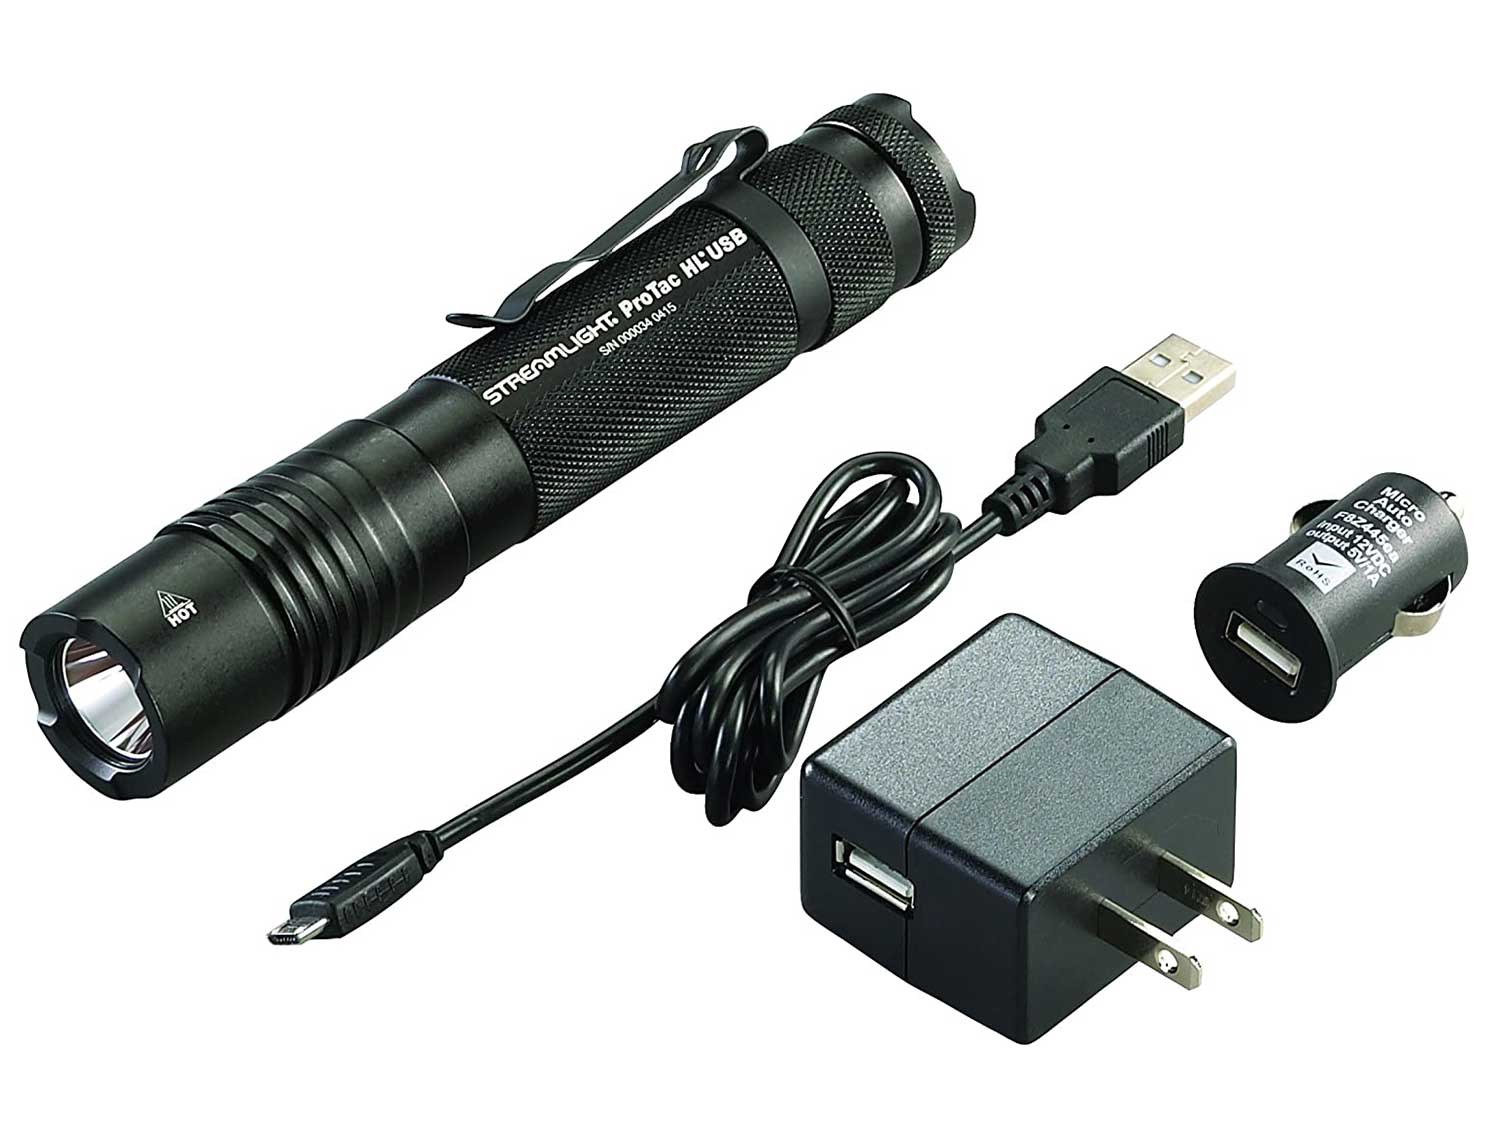 Streamlight 88054 ProTac HL USB 1000 Lumen Professional Tactical Flashlight with High/Low/Strobe with USB Charger - 1000 Lumens,Black